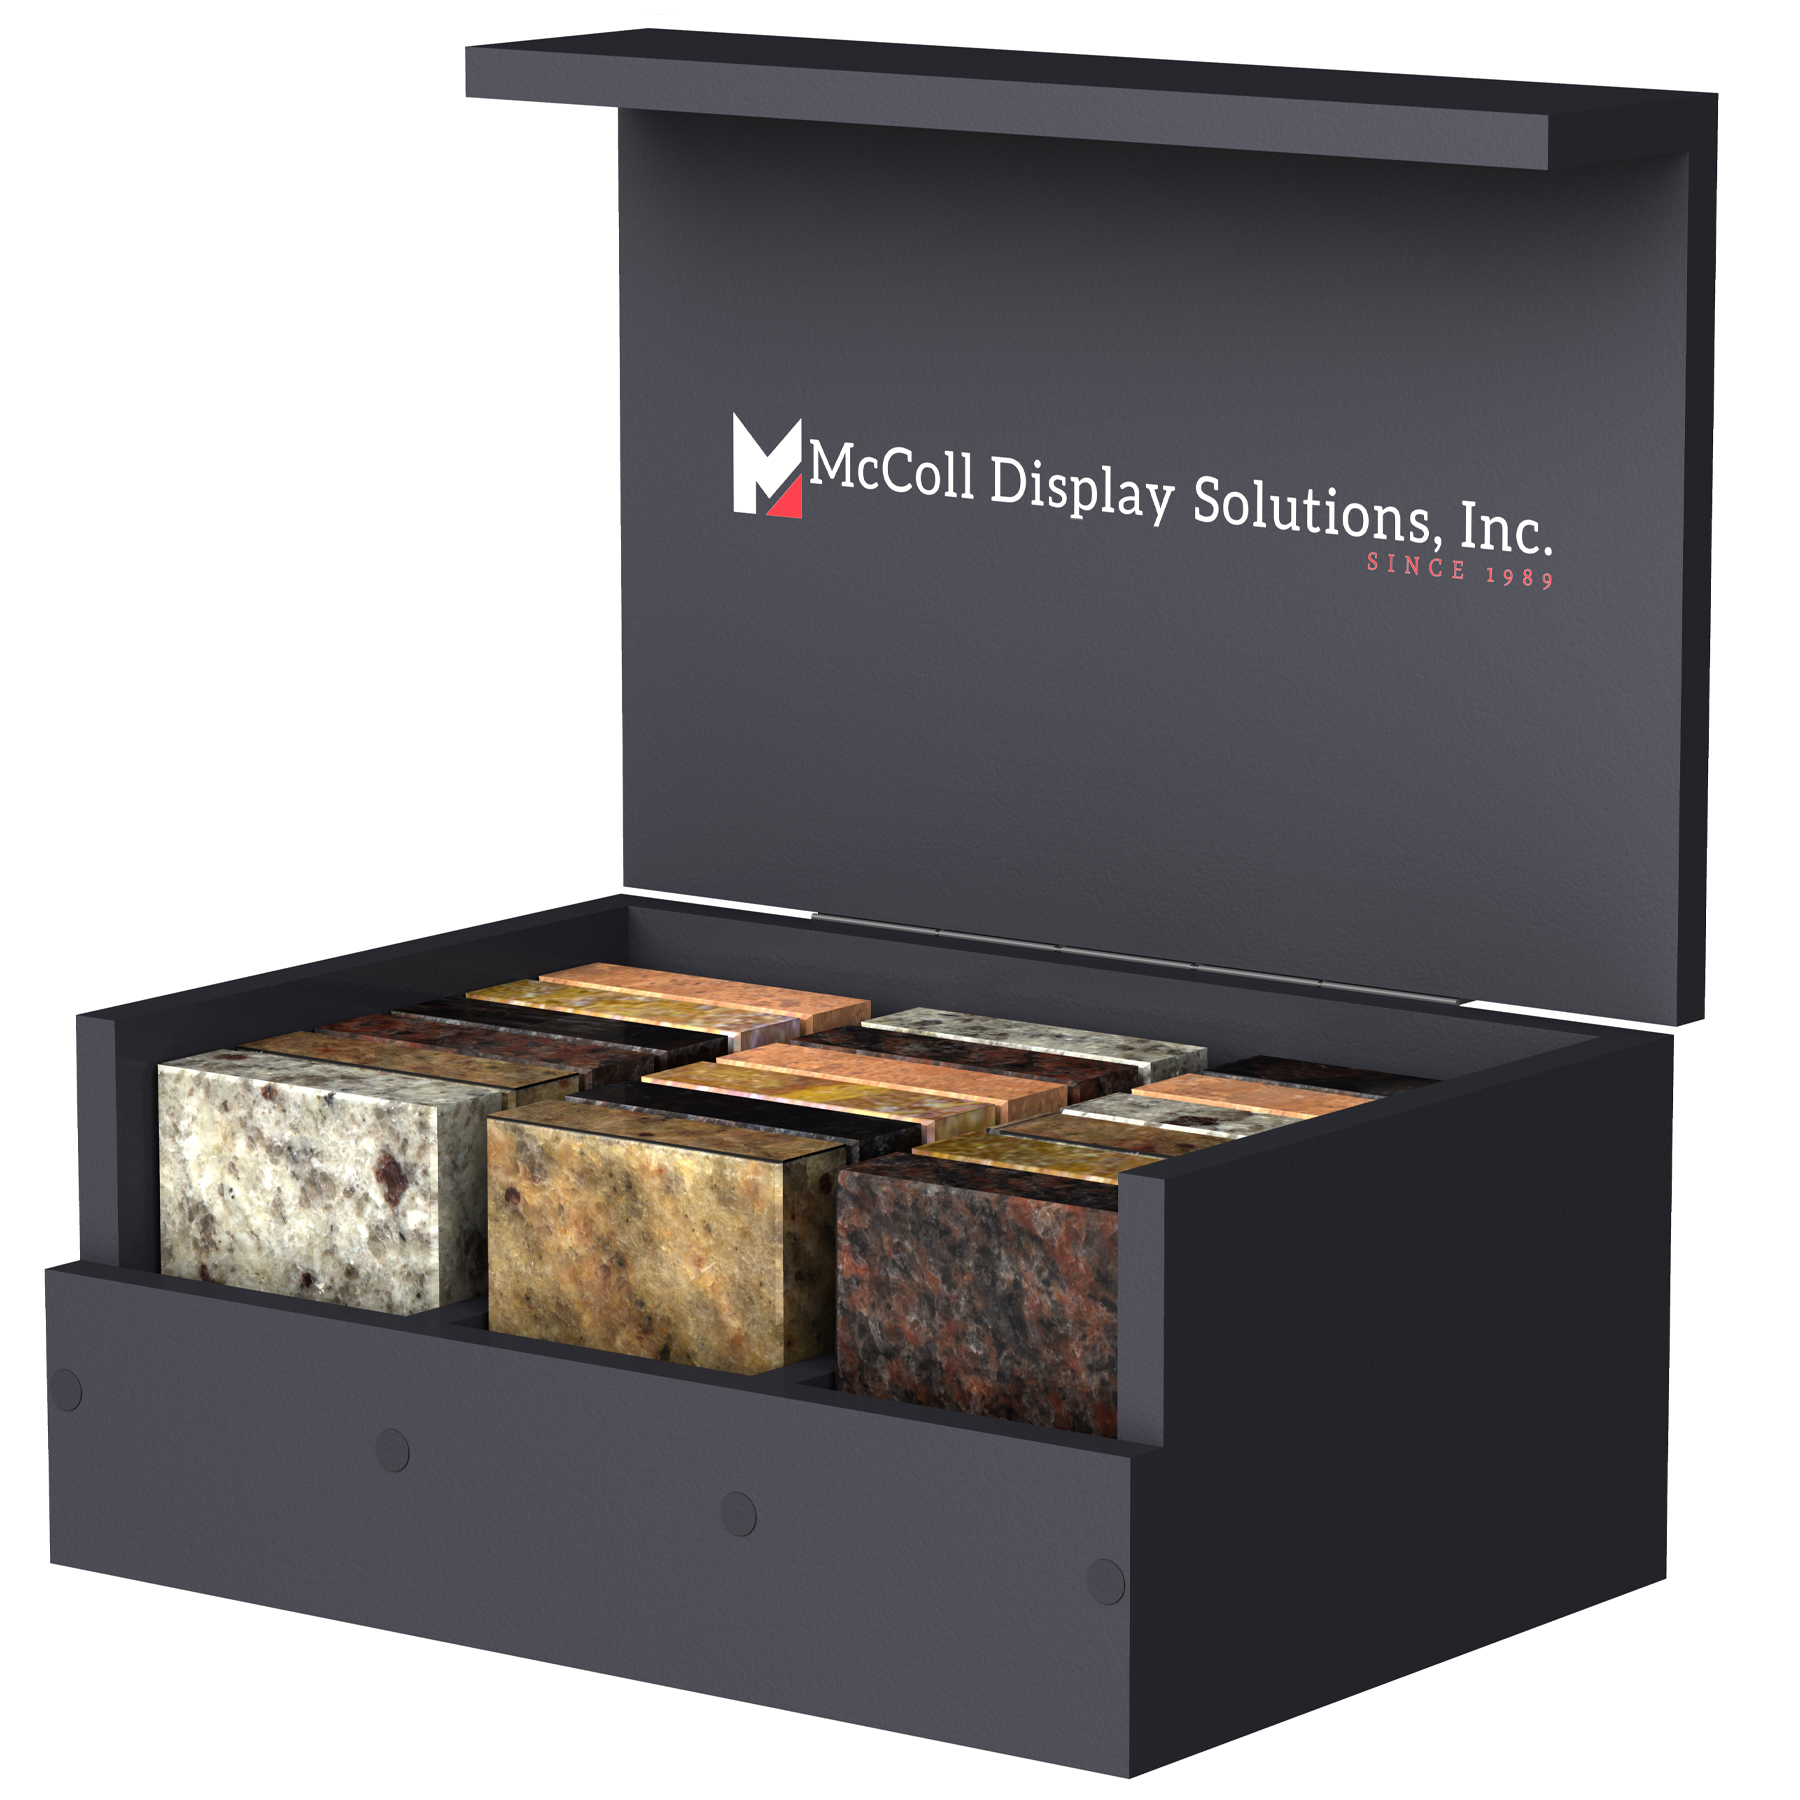 Display Tiles Stone Marble Composite Hardwood Decos Listellos in this Countertop Sample Box with Lid and Clasp